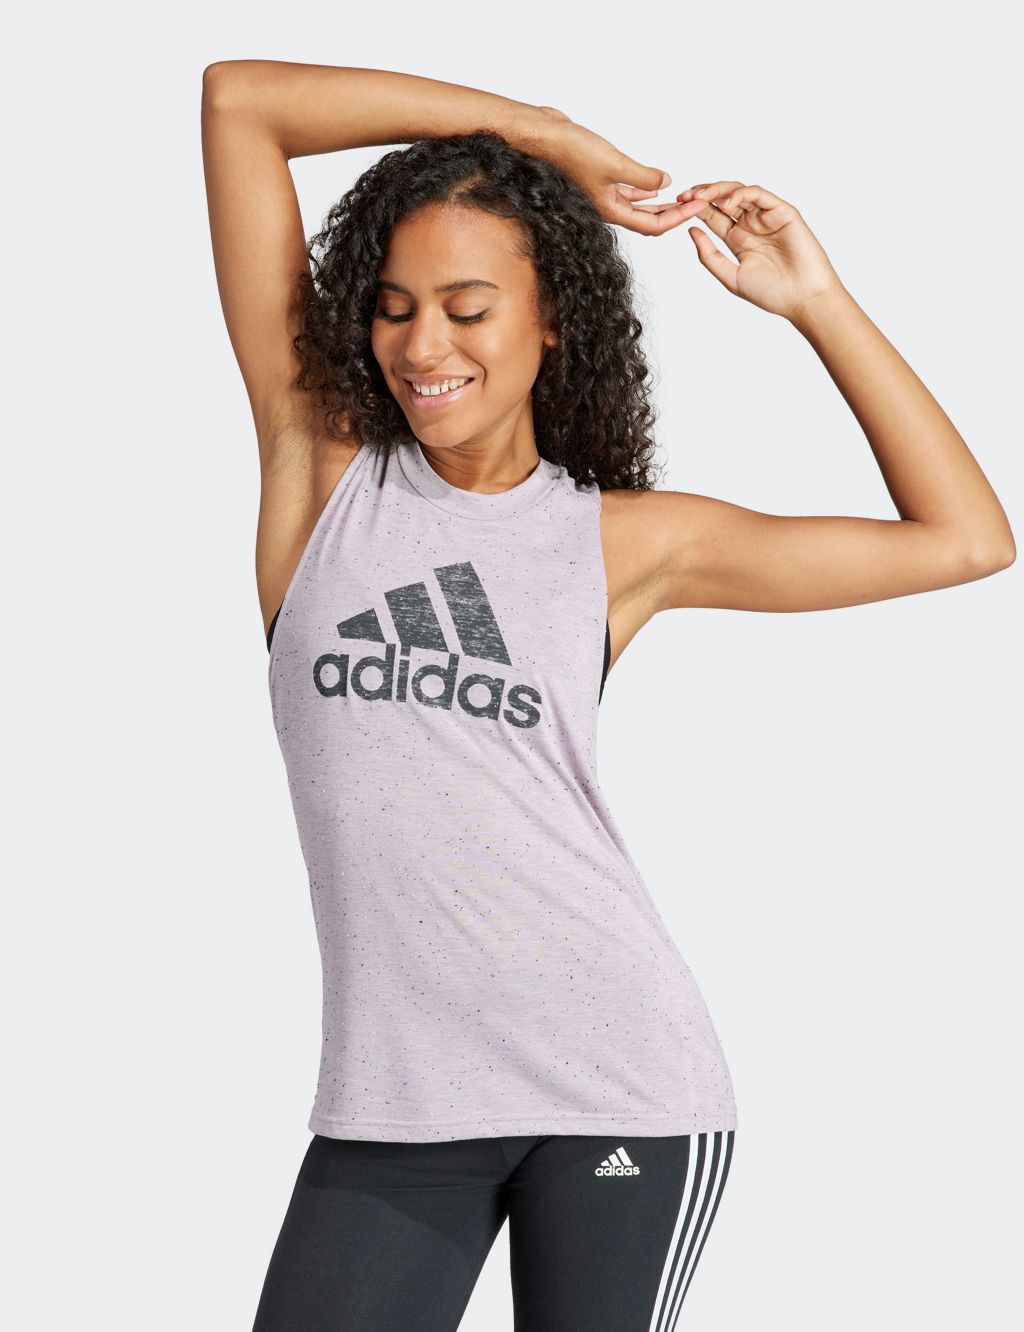 Scoop Neck Workout Tops & Shirts for Women